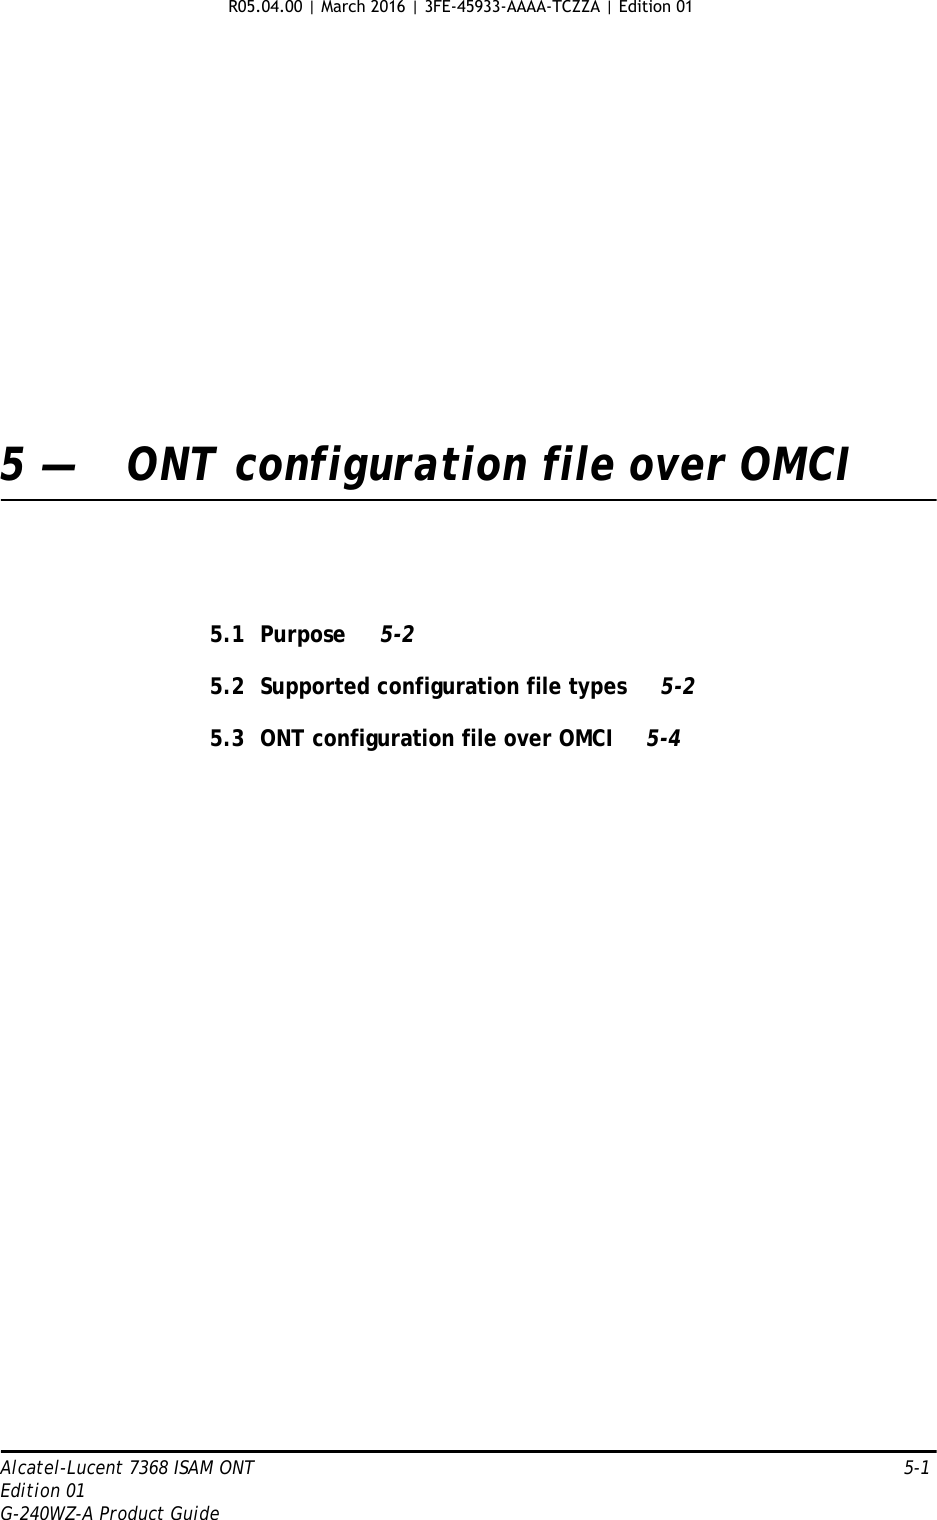 Alcatel-Lucent 7368 ISAM ONT   5-1Edition 01G-240WZ-A Product Guide5 — ONT configuration file over OMCI5.1 Purpose 5-25.2 Supported configuration file types 5-25.3 ONT configuration file over OMCI 5-4R05.04.00 | March 2016 | 3FE-45933-AAAA-TCZZA | Edition 01 